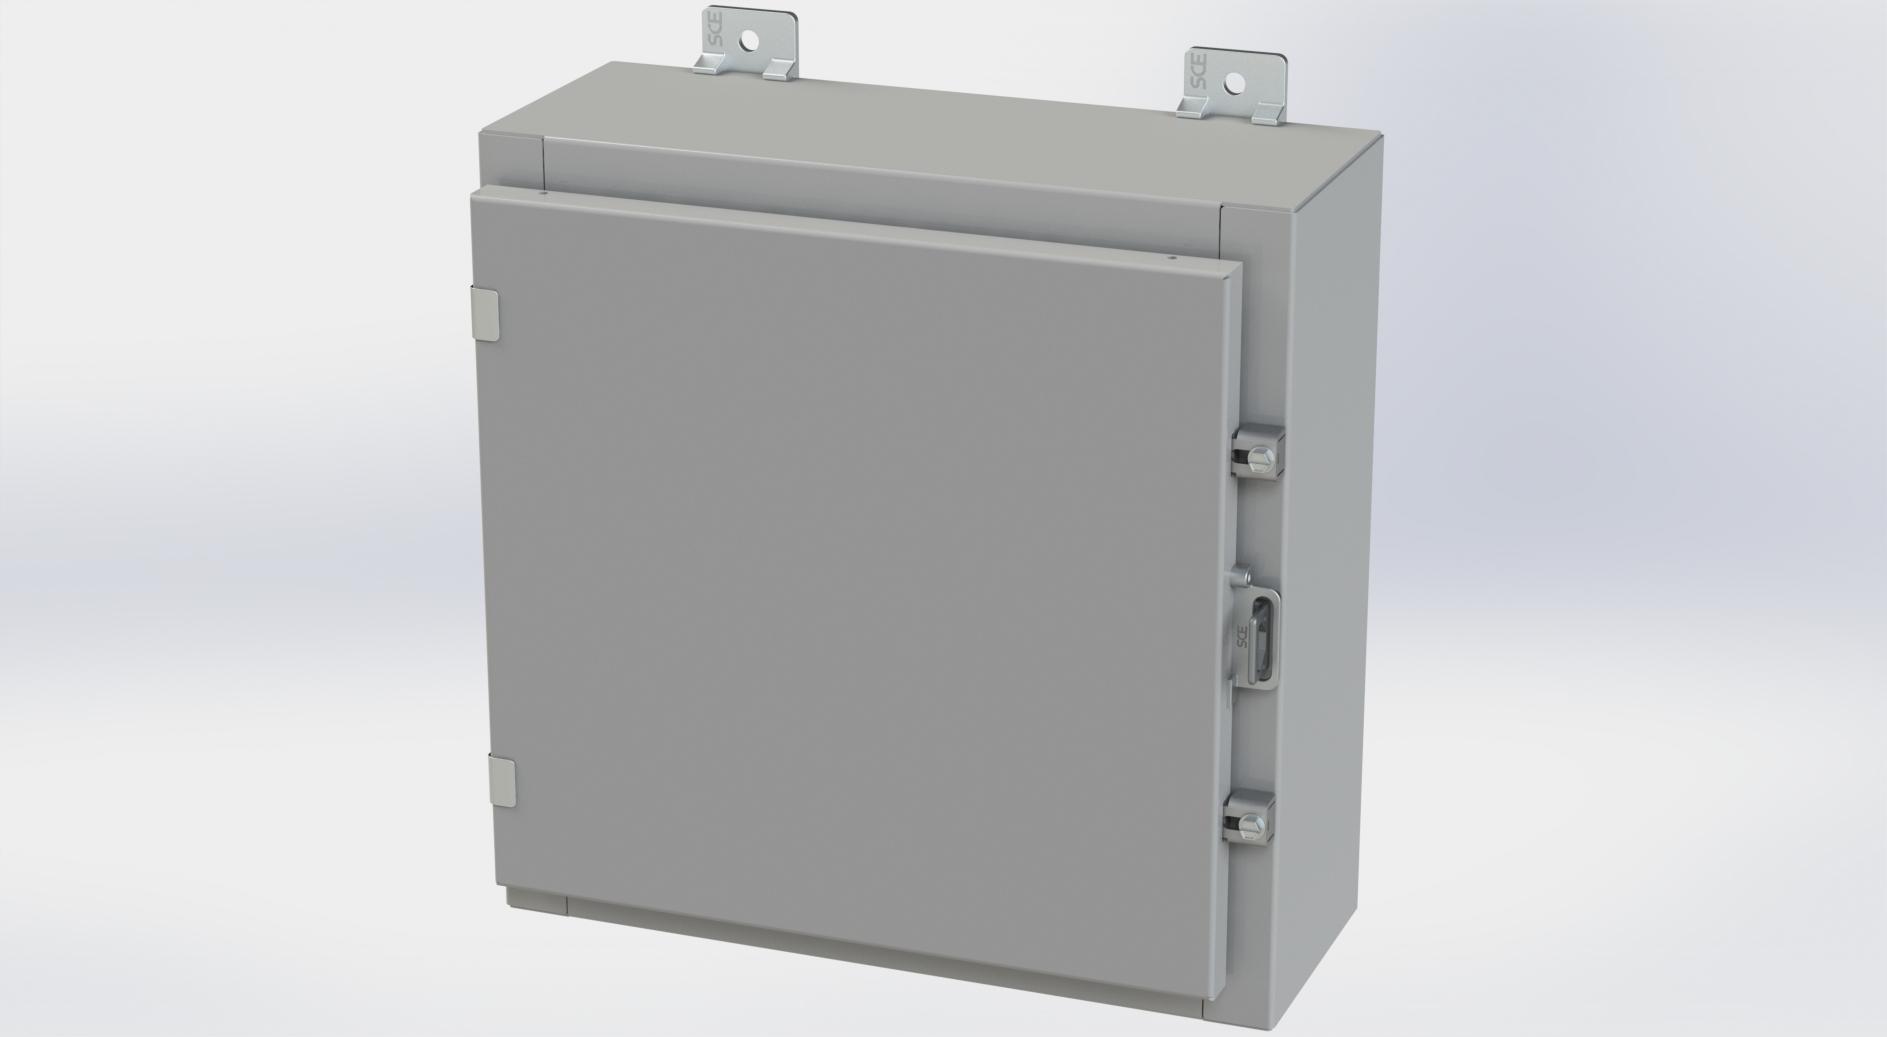 Saginaw Control SCE-16H1606LP Nema 4 LP Enclosure, Height:16.00", Width:16.00", Depth:6.00", ANSI-61 gray powder coating inside and out. Optional panels are powder coated white.